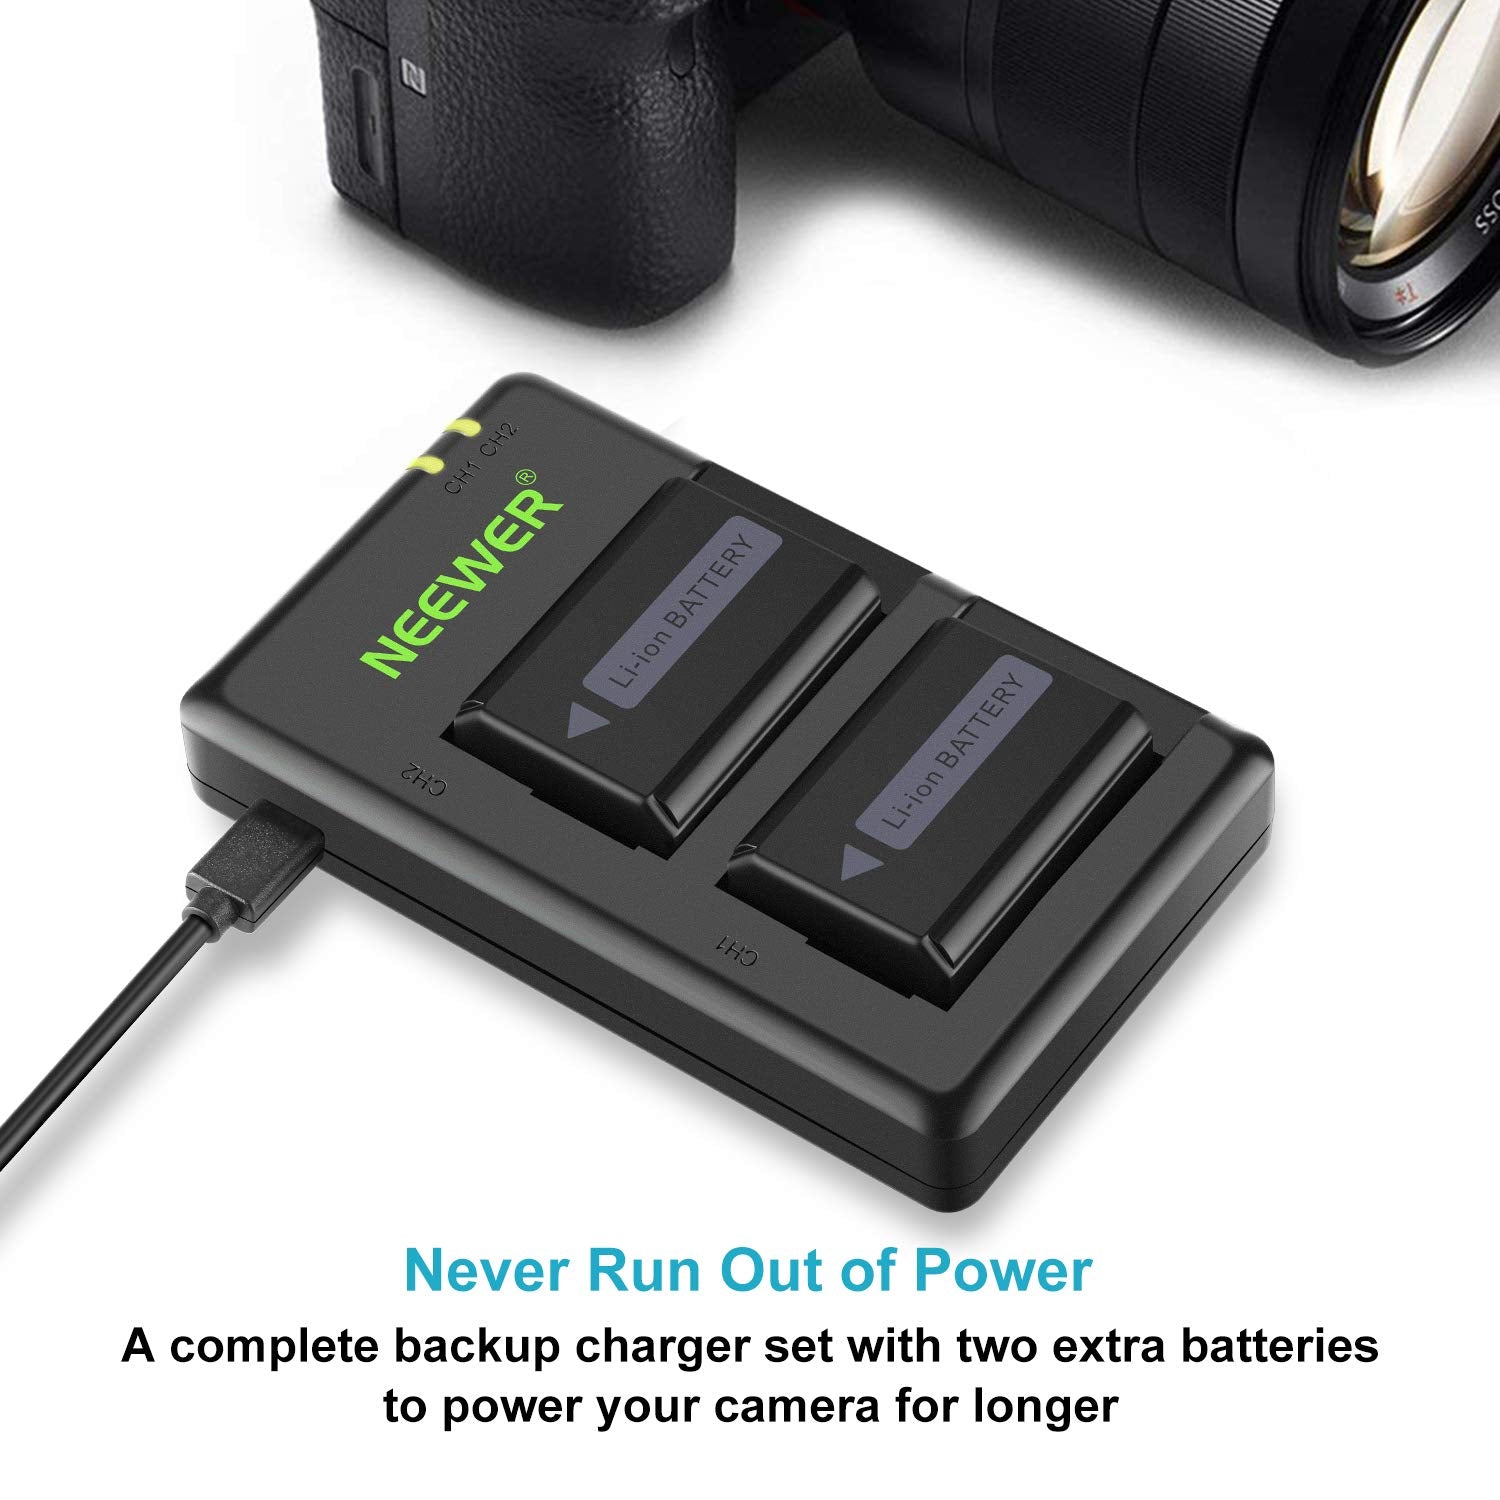 NEEWER NP-FW50 Camera Battery Charger Set for Sony